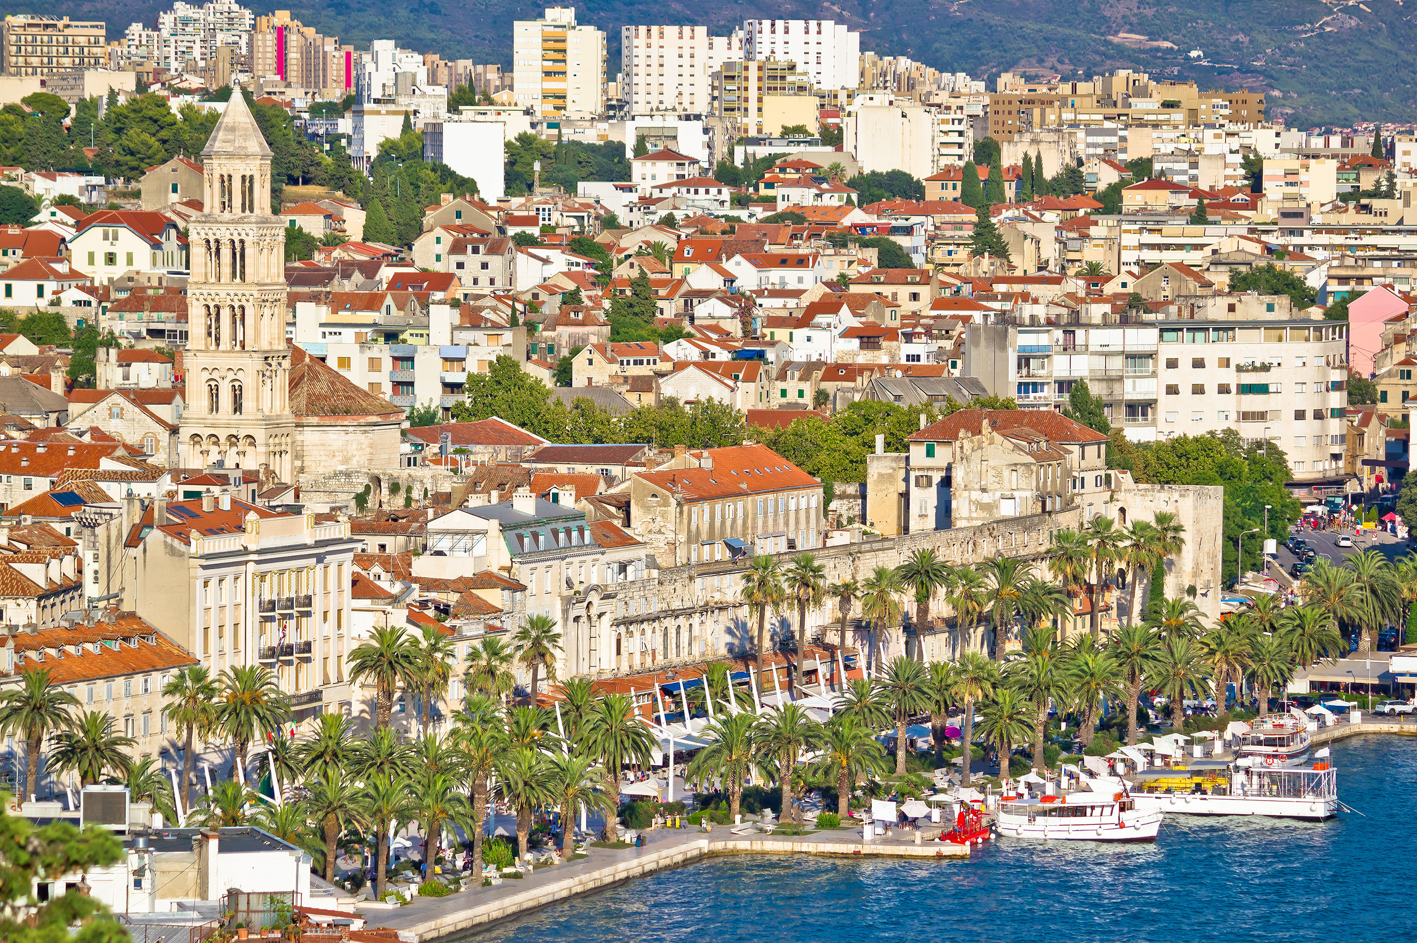 Rich history, stunning architecture, fresh fish and cold wine - it’s easy to see why Split is our expert’s favourite destination